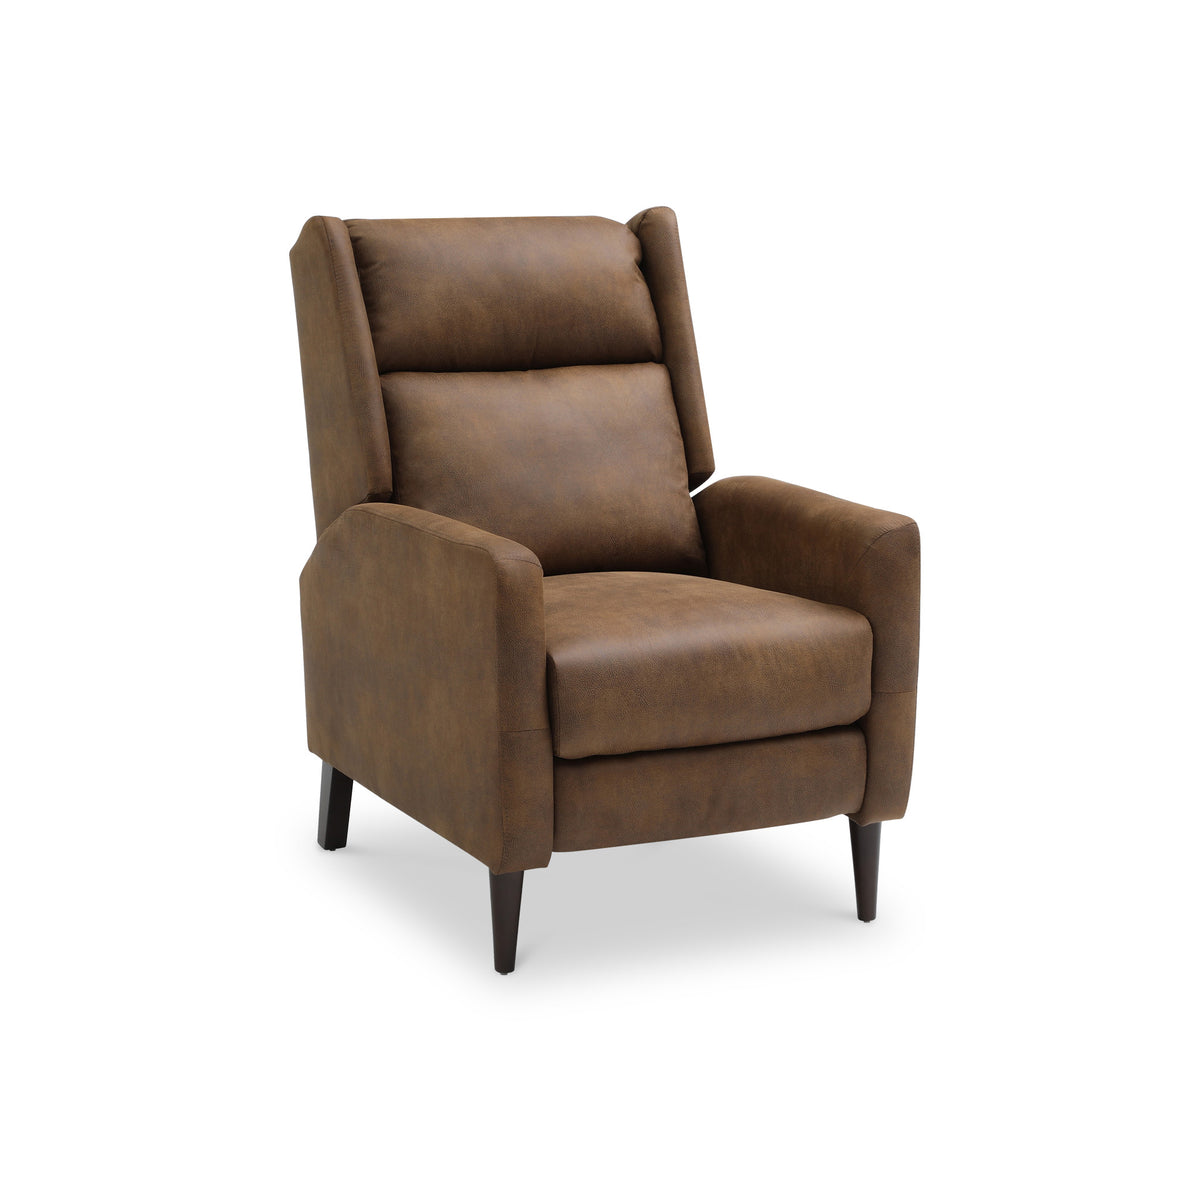 Moreton Brown Faux Leather Reclining Armchair from Roseland Furniture